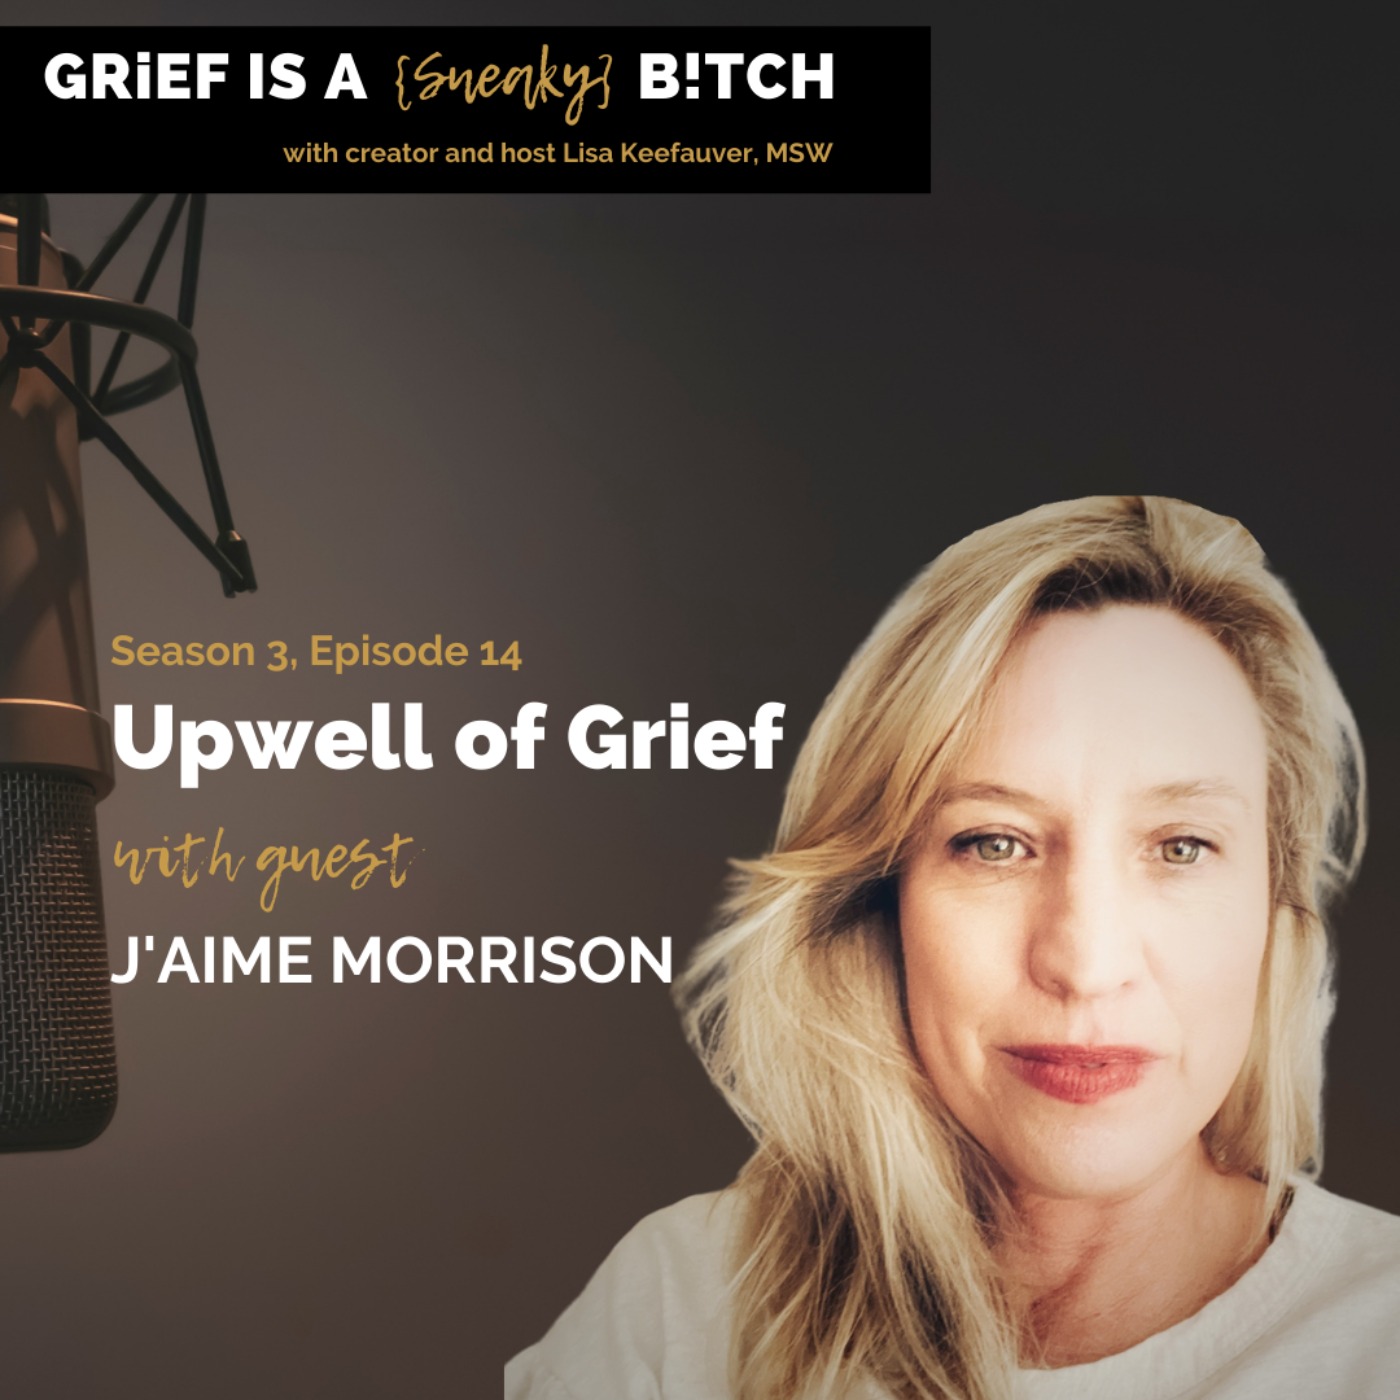 J'aime Morrison | Upwell of Grief